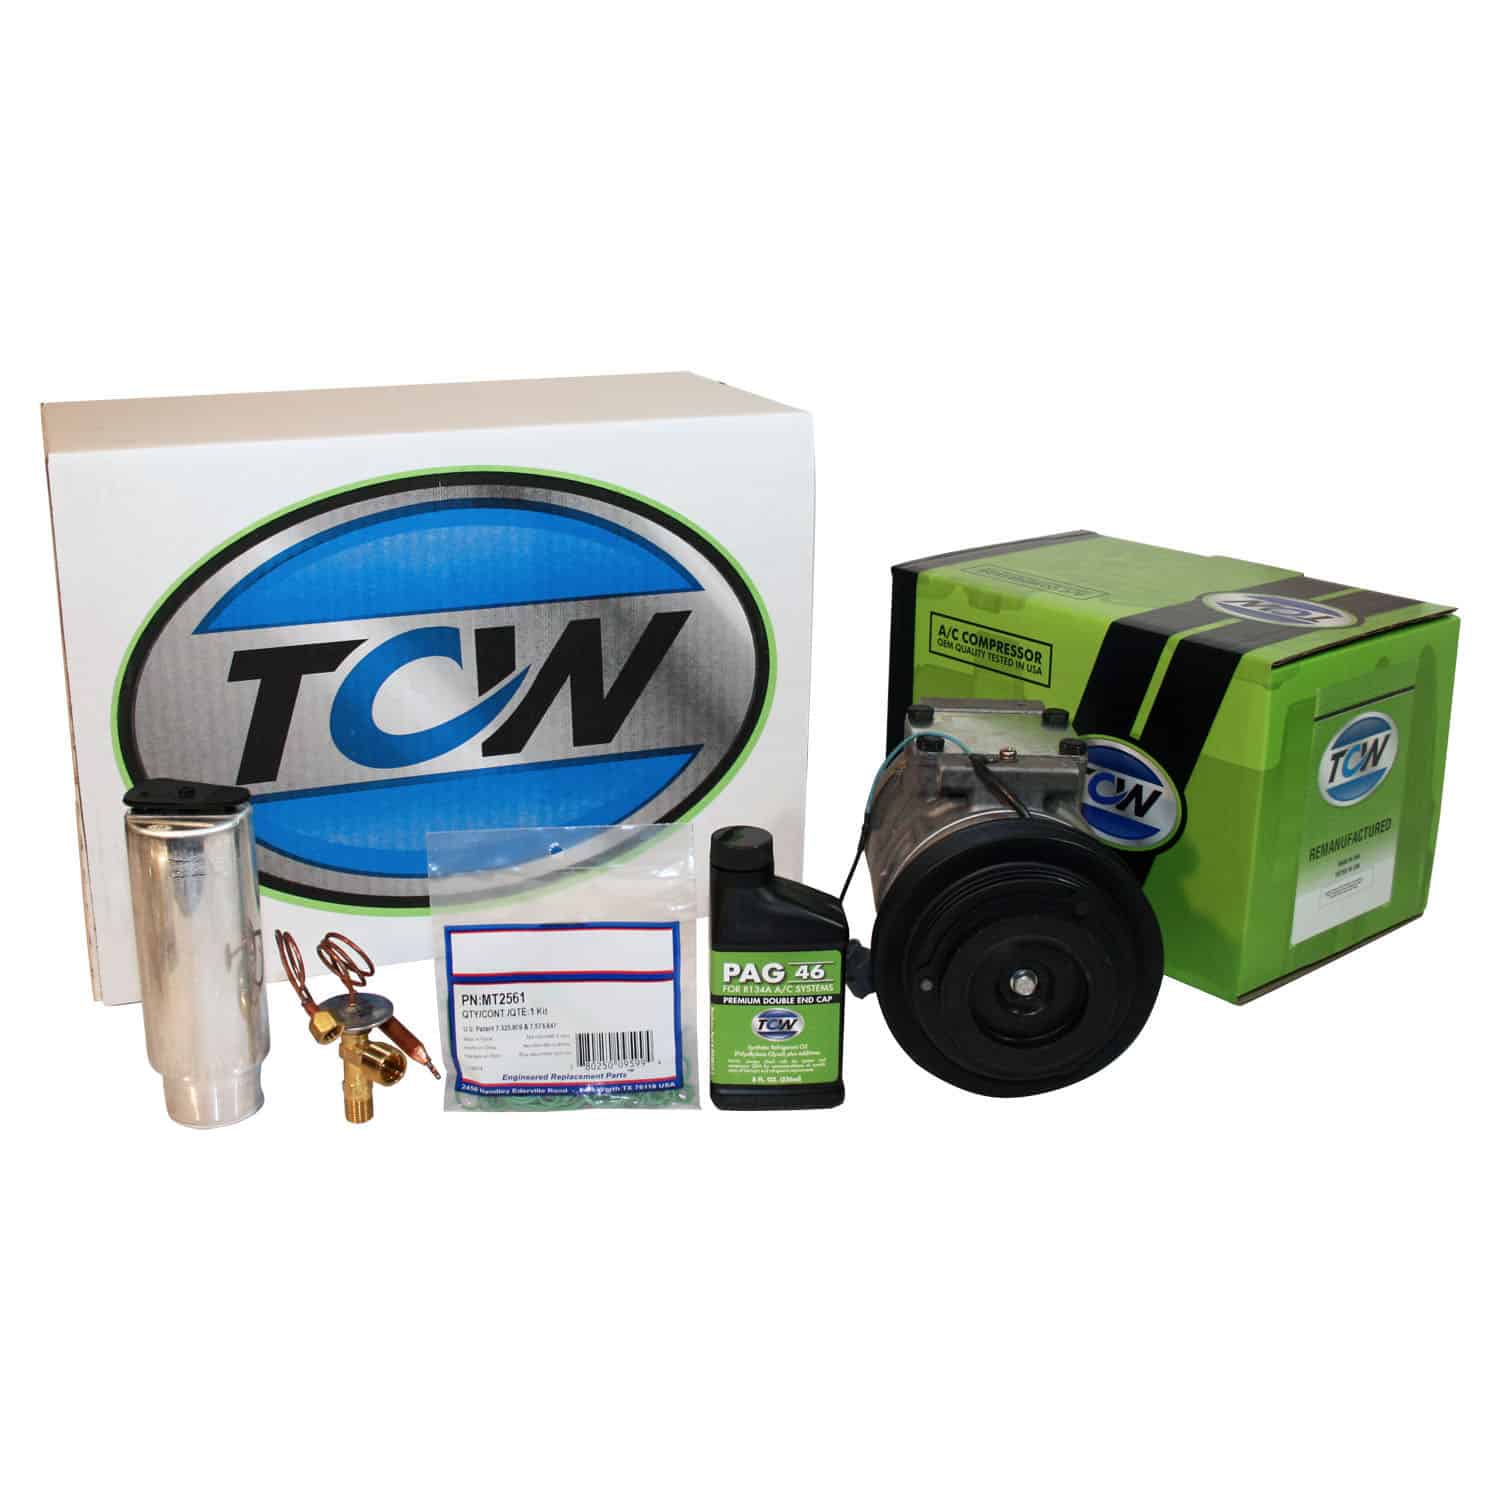 TCW Vehicle A/C Kit K1000525R Remanufactured